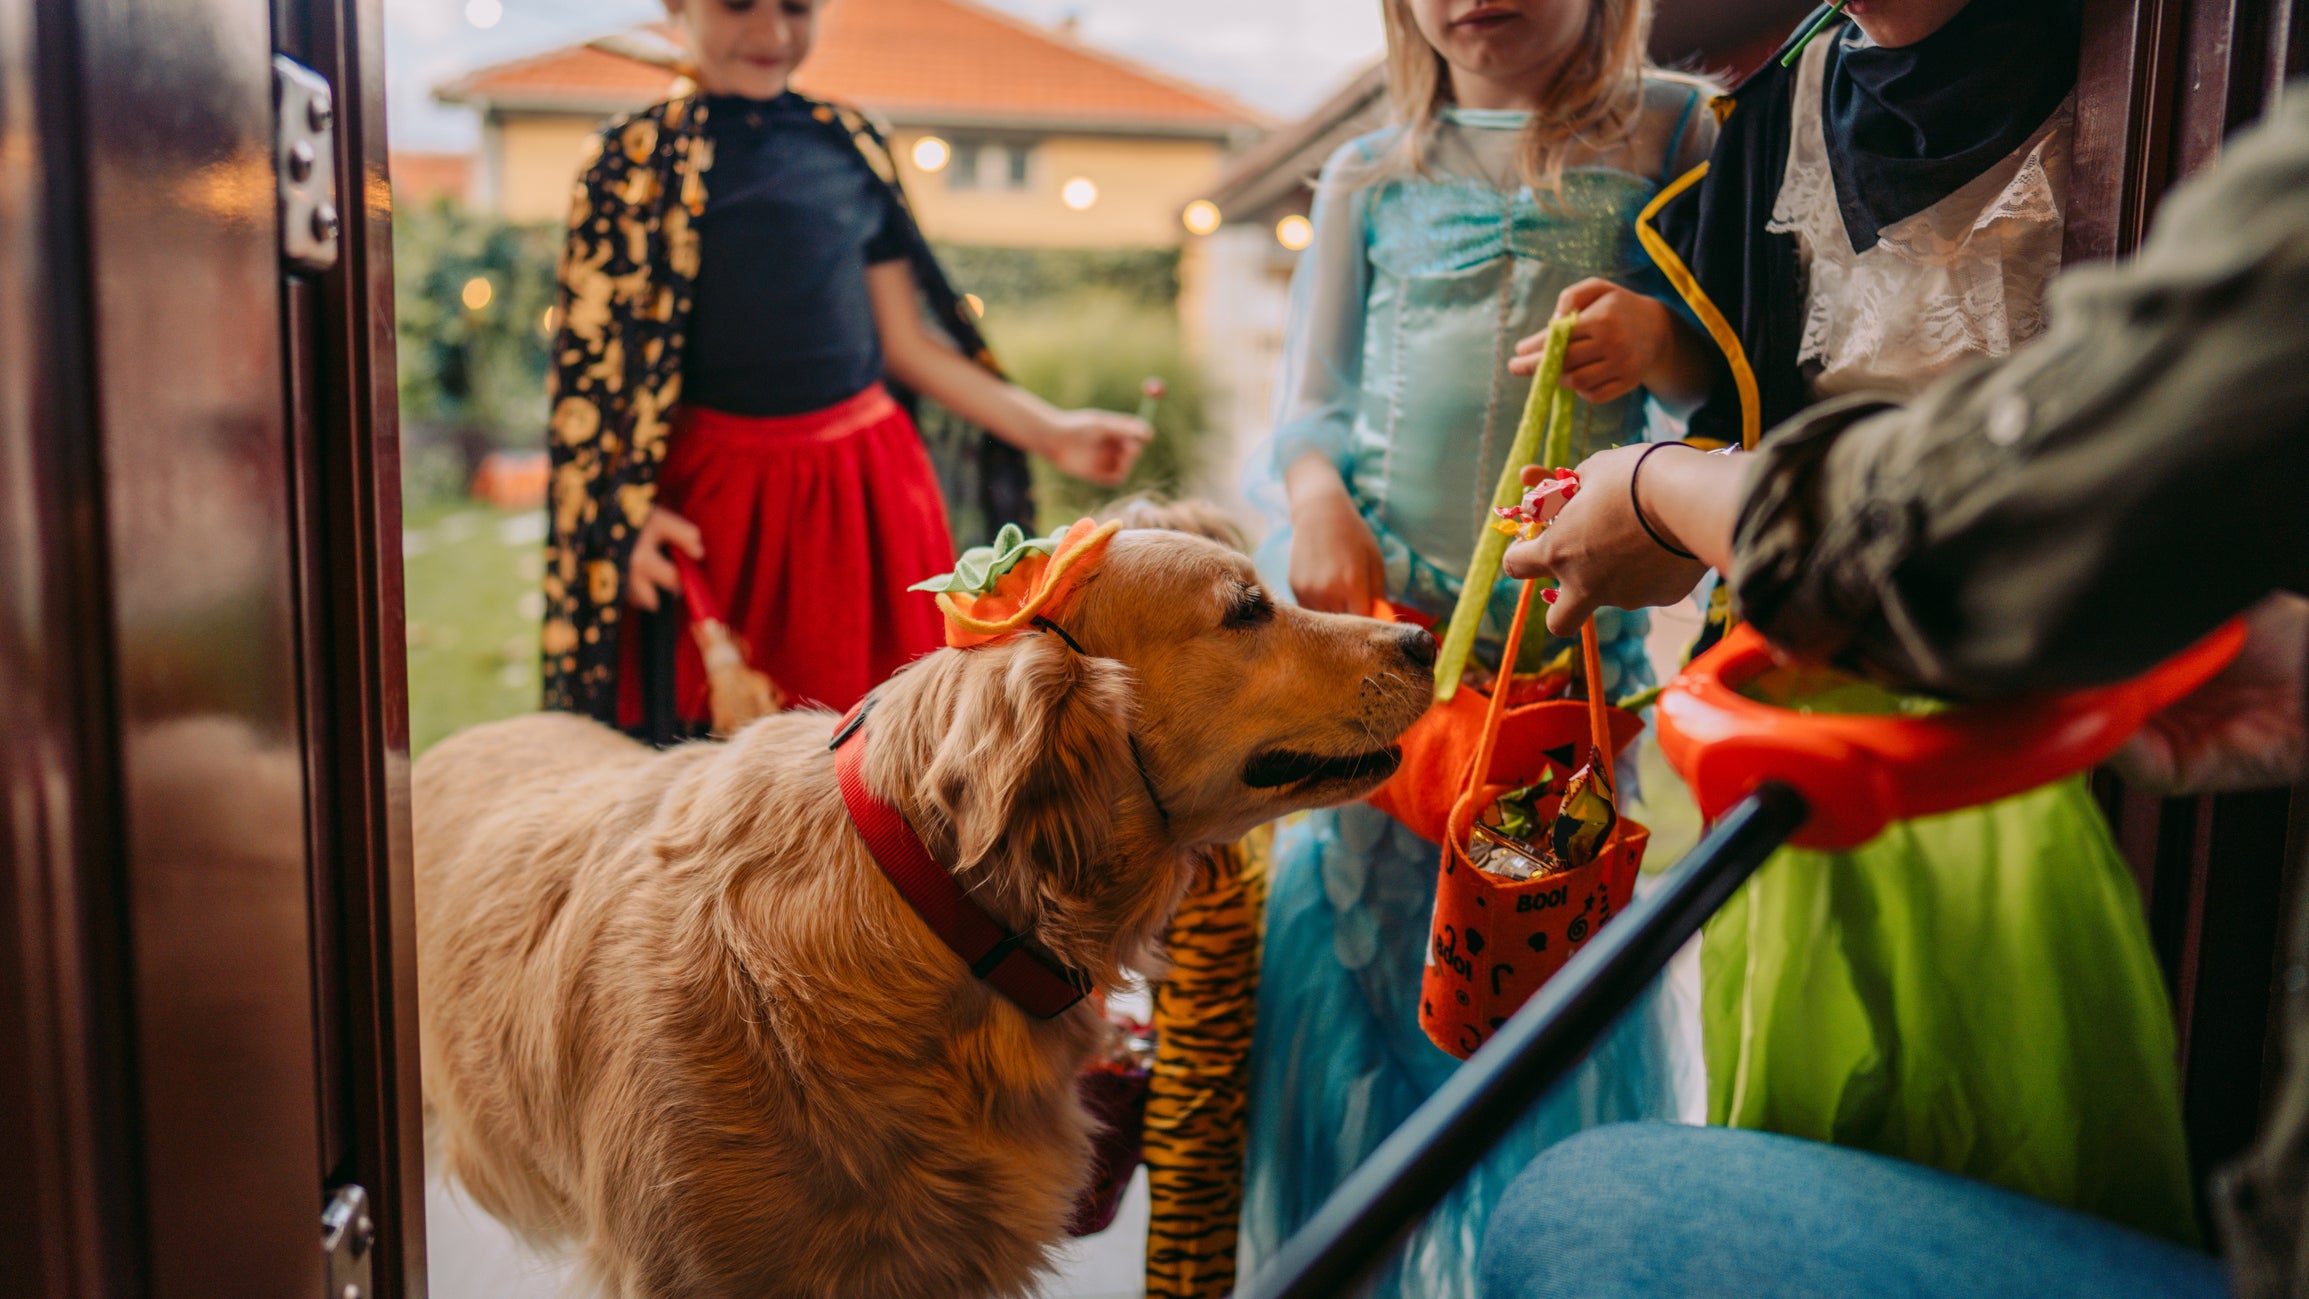 golden retriever in a pumpkin costume surrounded by children in costumes